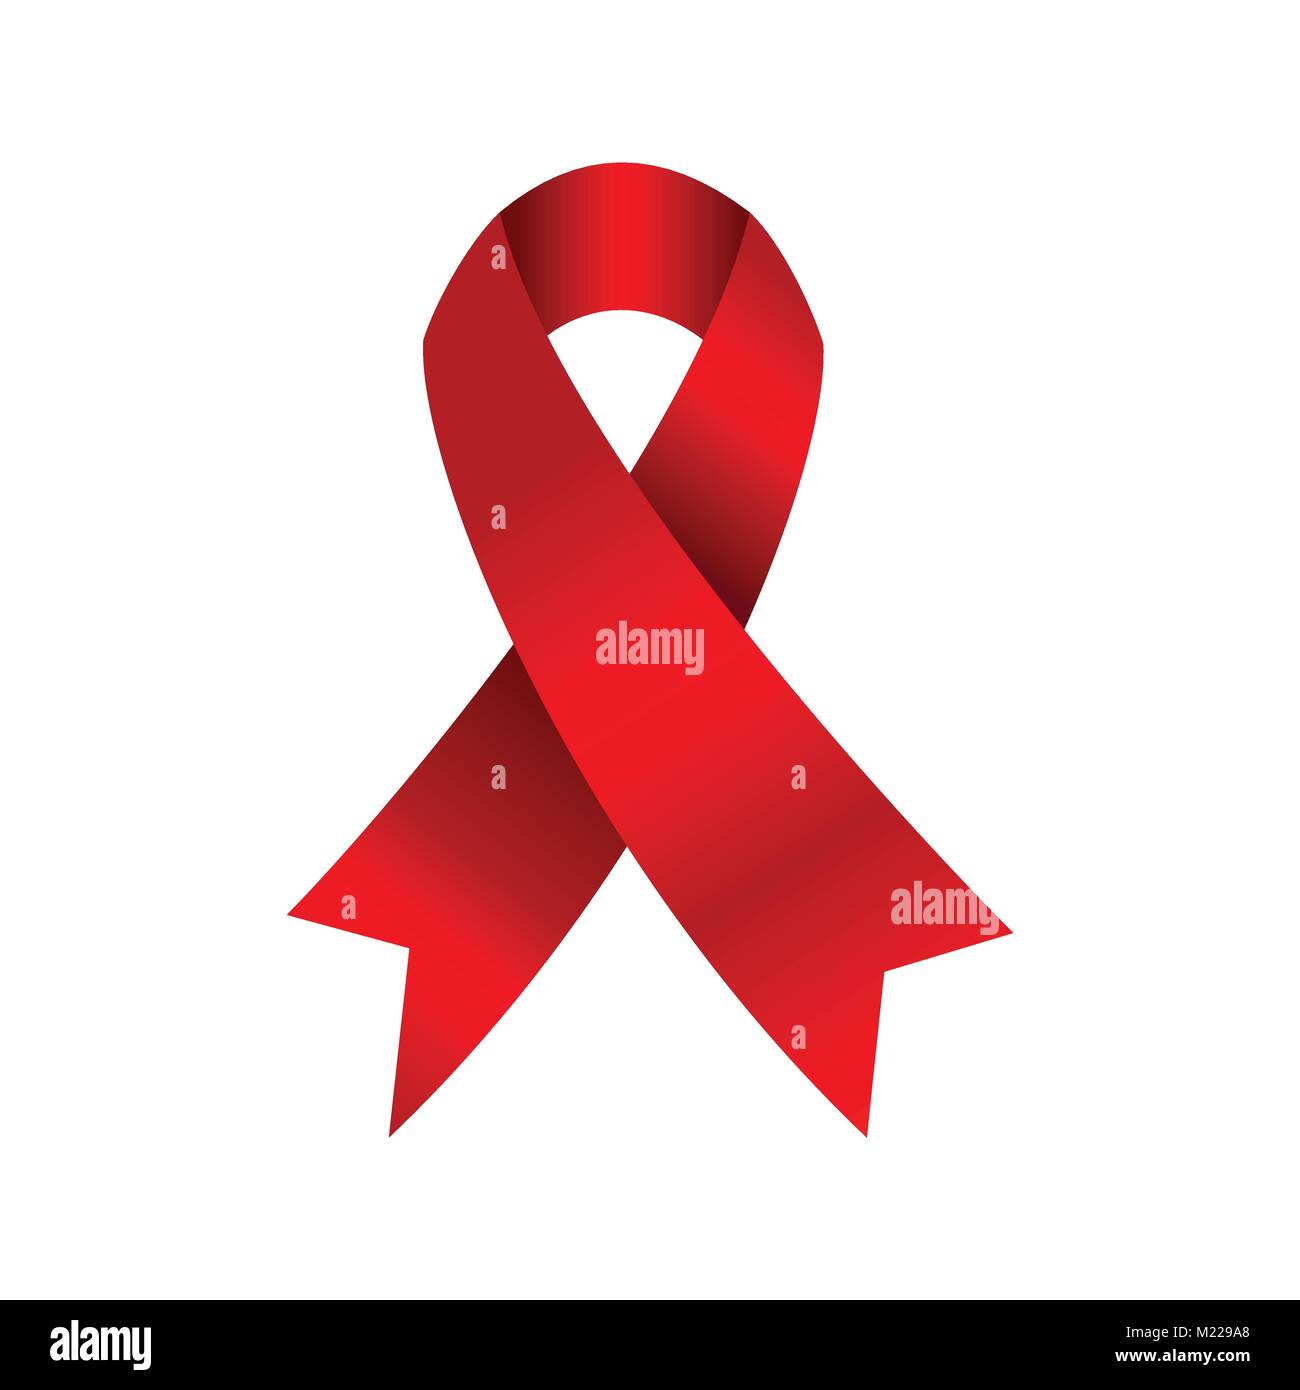 The Symbol Of The Fight Against Aids Is A Red Ribbon Light Beige Background  And Dark Circle Around Stock Illustration - Download Image Now - iStock